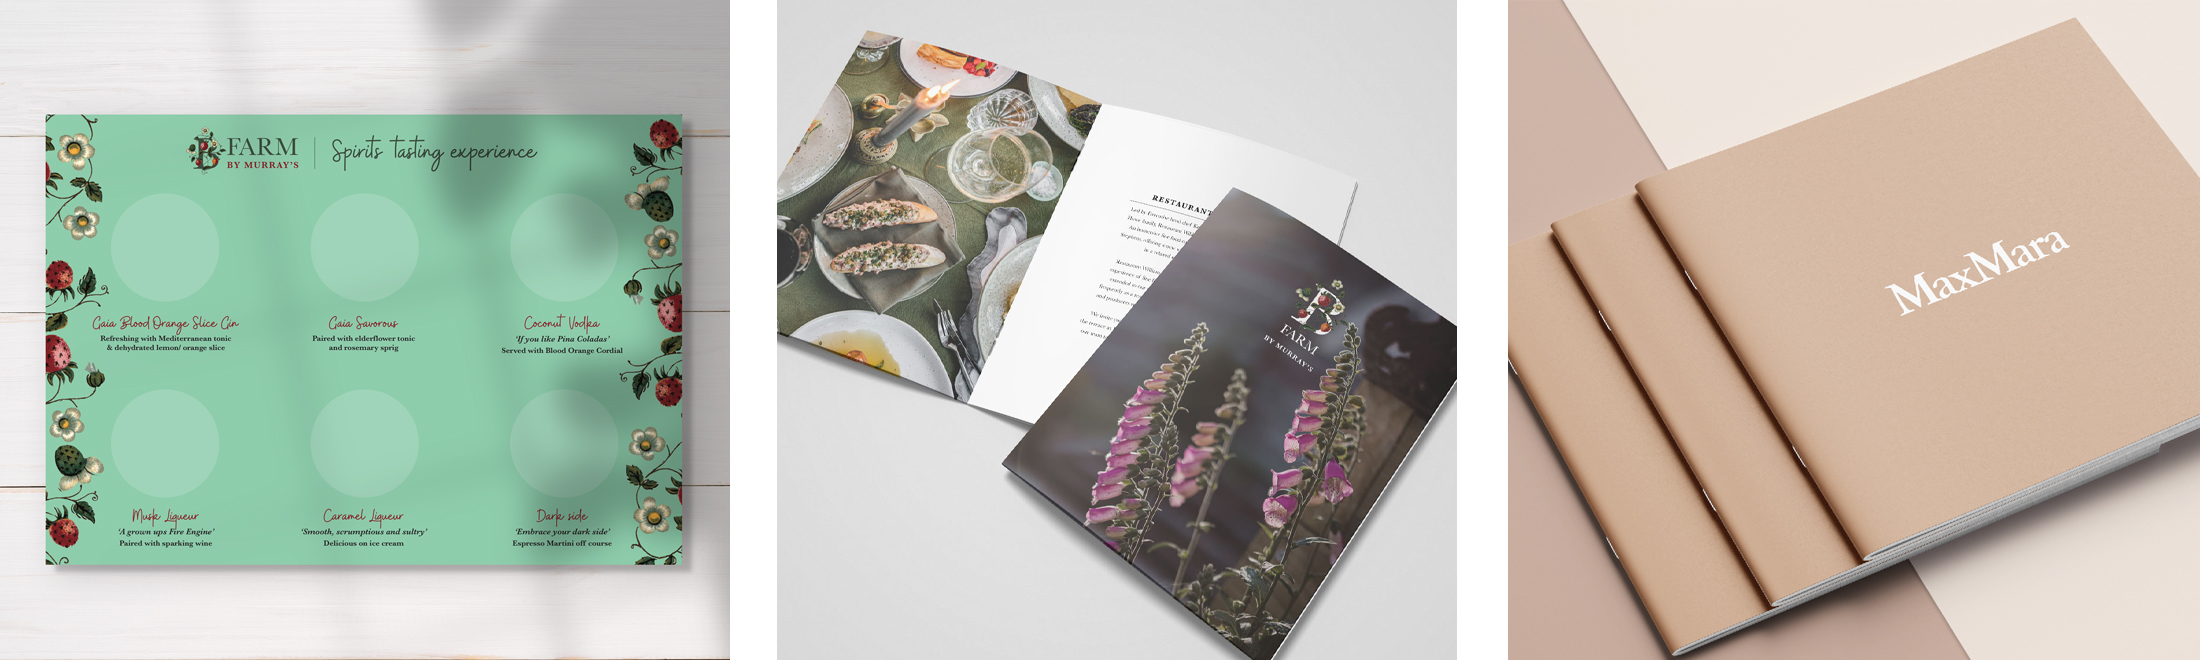 Print Design Booklets and Tasting Card